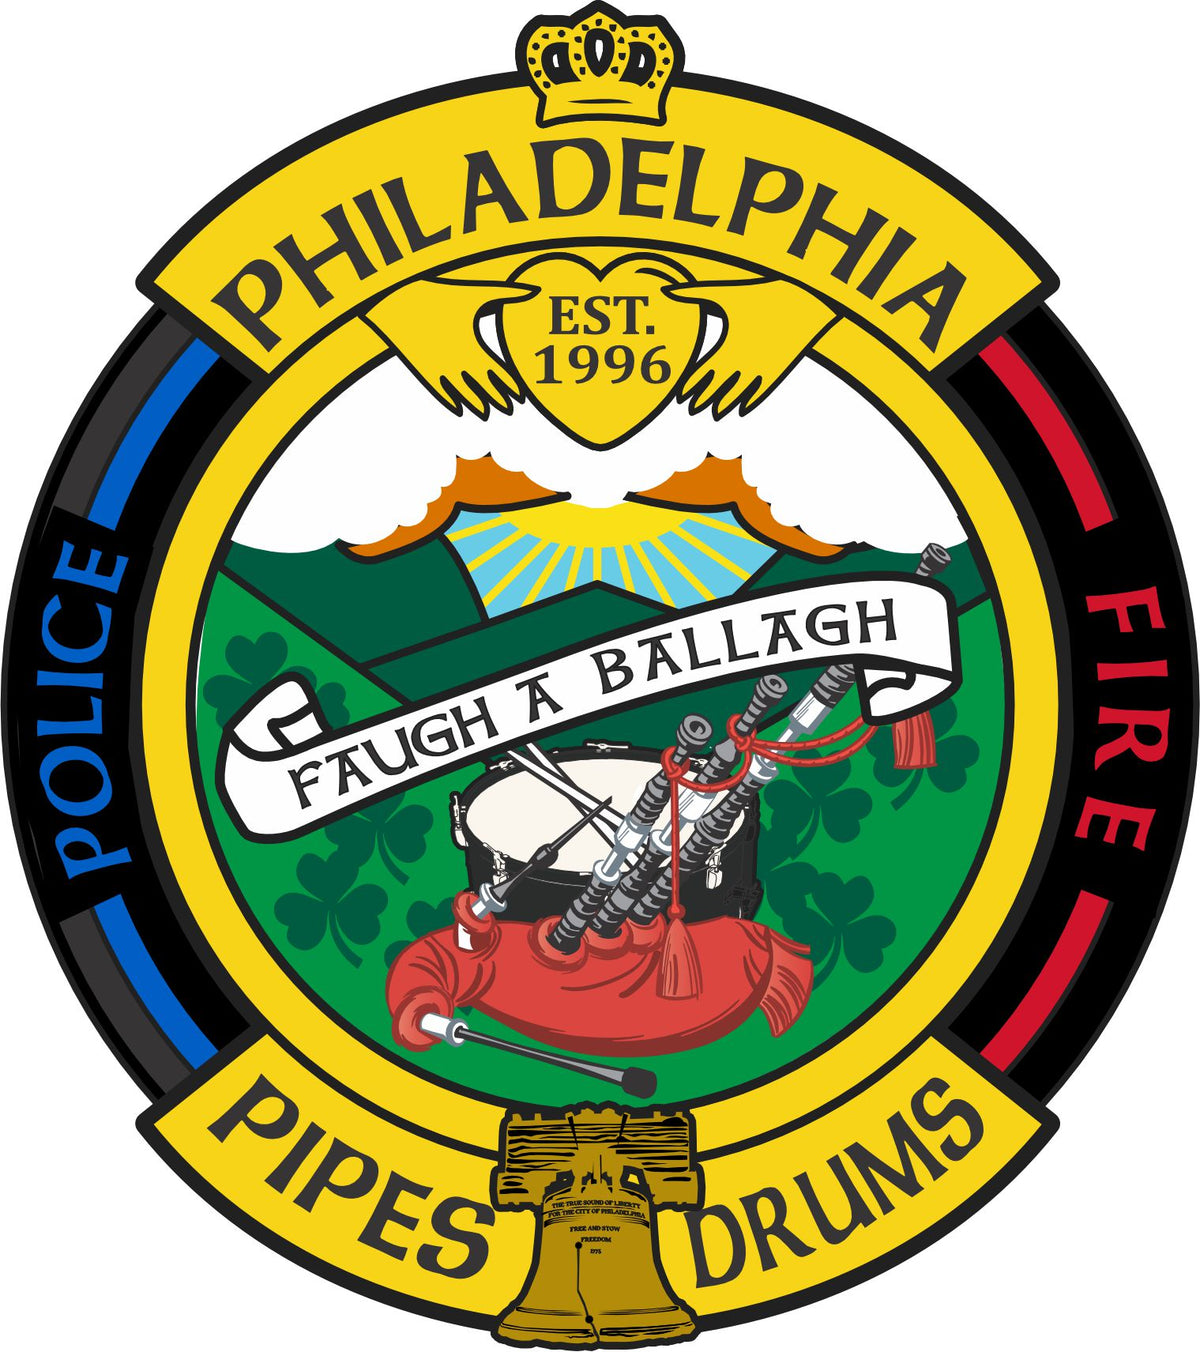 Philadelphia Pipes and Drums Customer Decal - Powercall Sirens LLC